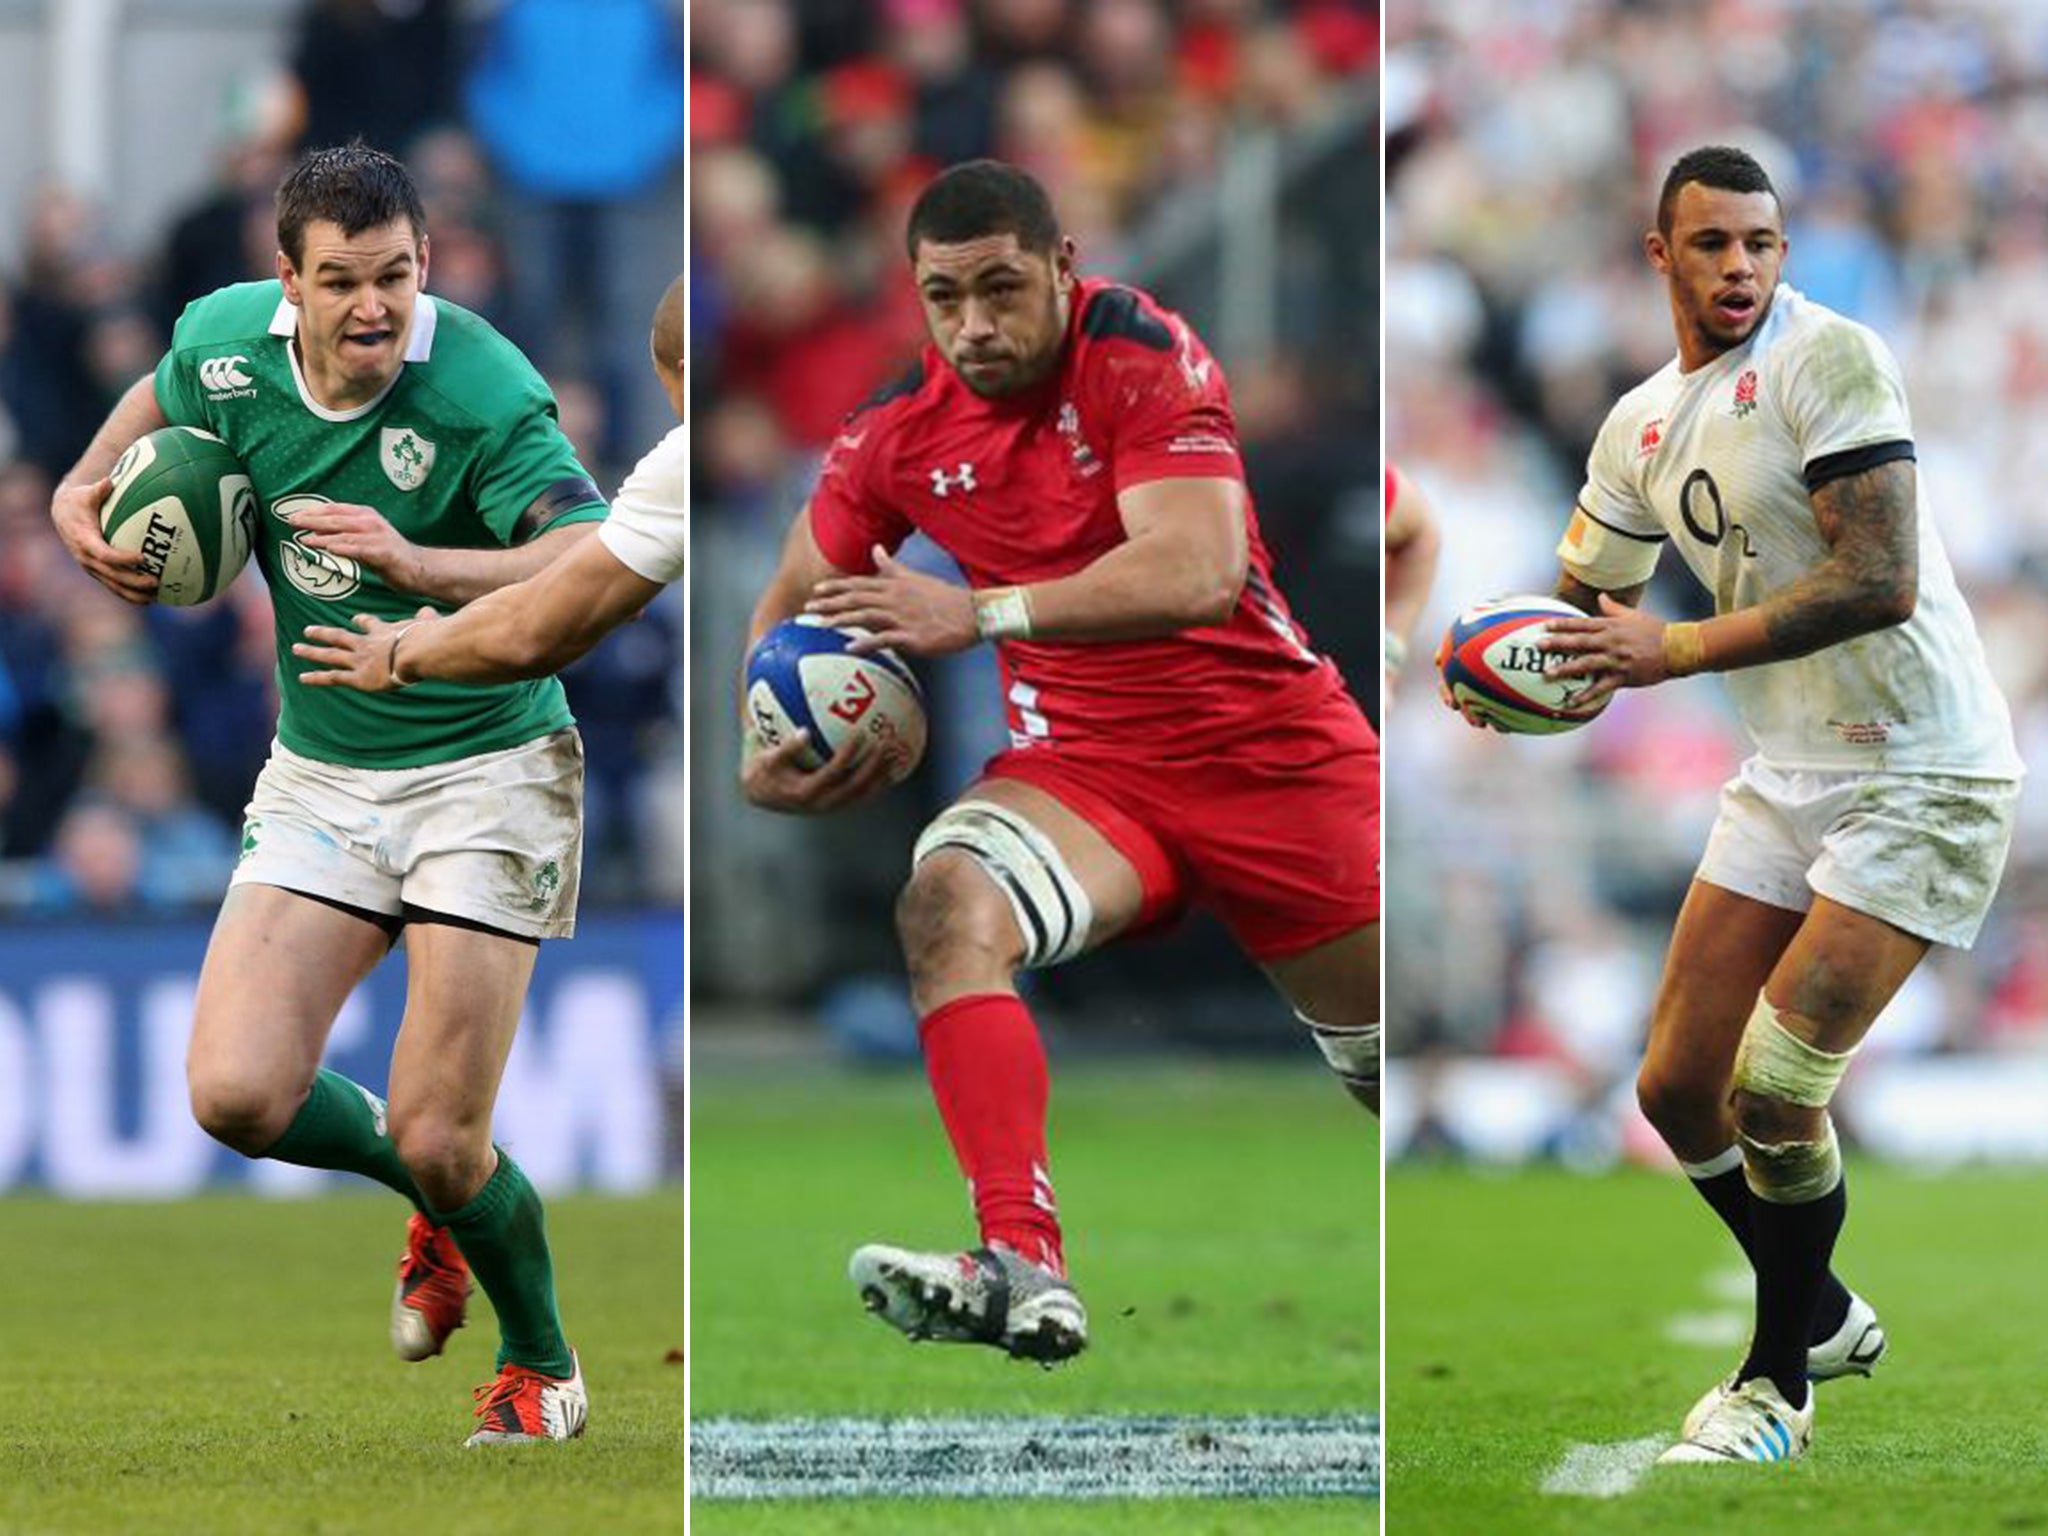 From left: Jonathan Sexton has lit up Ireland; Toby Faletau has the power to put Wales back in the running for glory; and Courtney Lawes’ return is great news for England